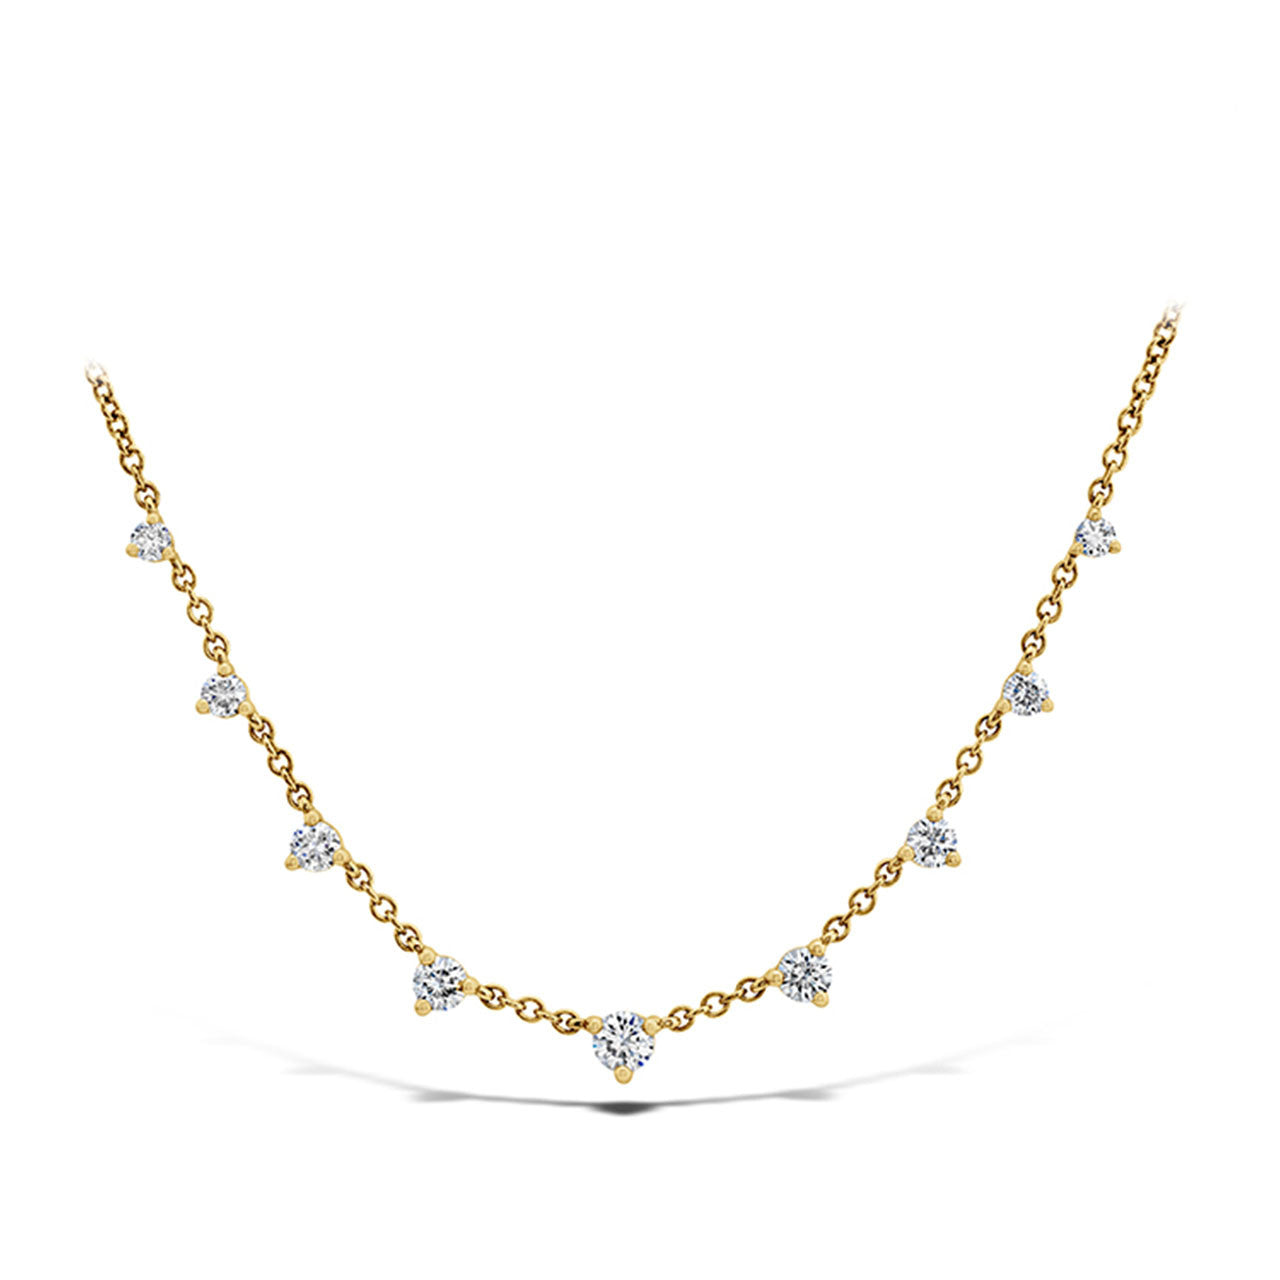 18K YELLOW GOLD 9 STATION NECKLACE .39CT